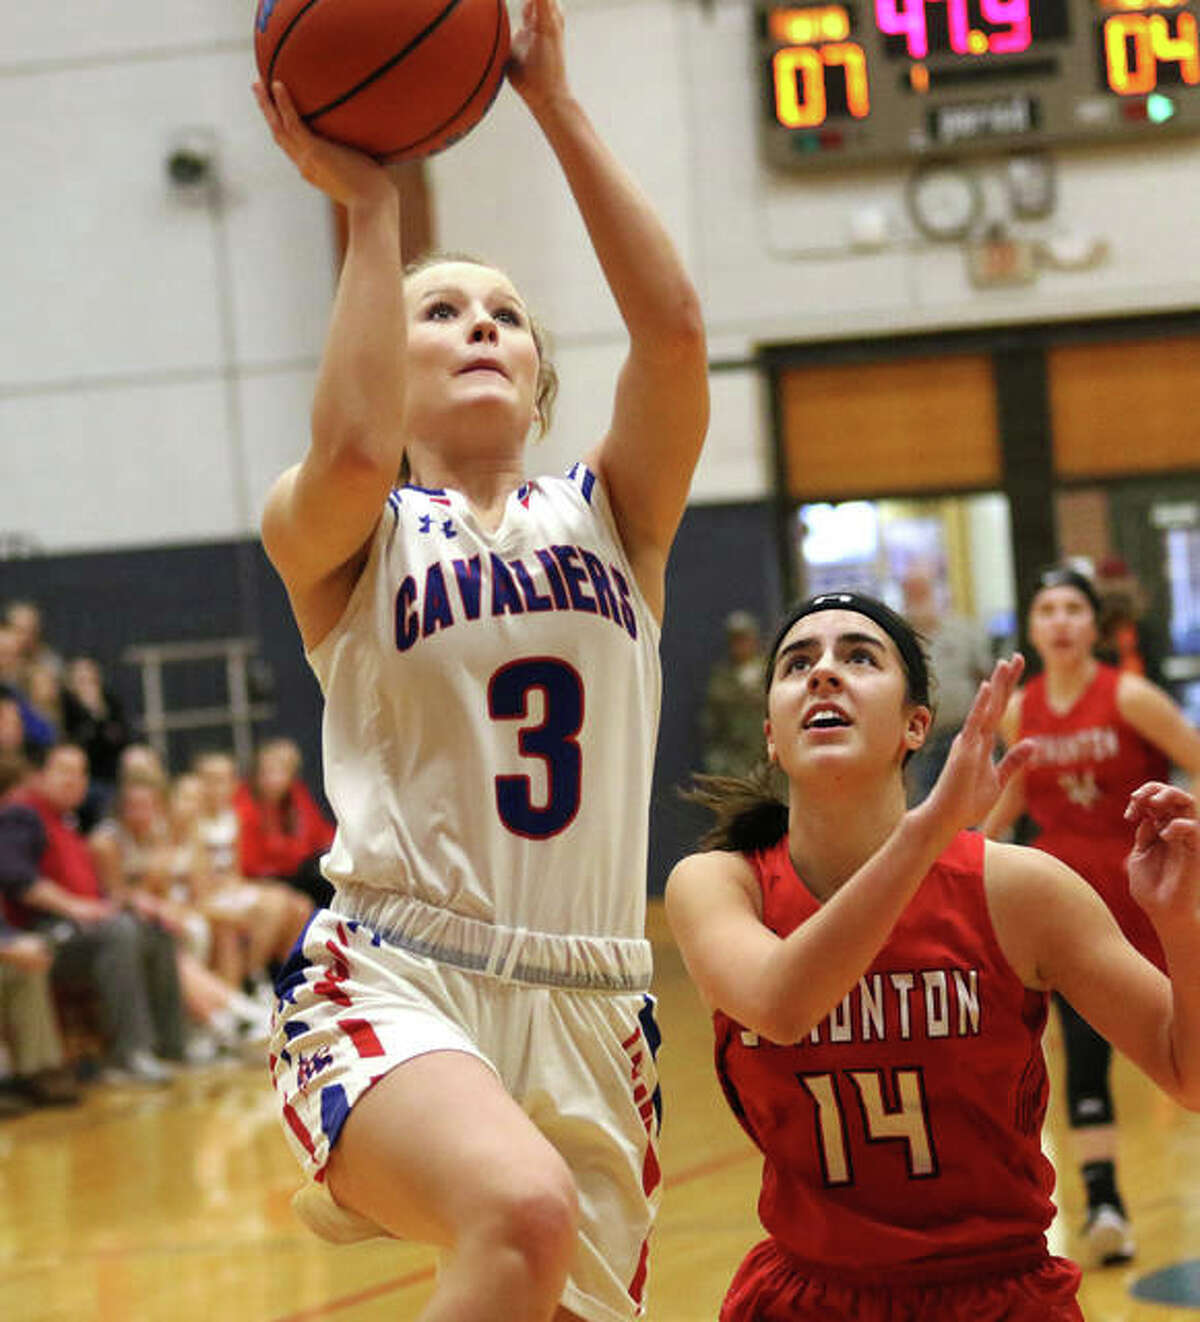 Carlinville’s Eryn Seals (3) goes in for a layup ahead of Staunton’s Katie Masinelli on a break Thursday at the Carlinville Holiday Tourney.